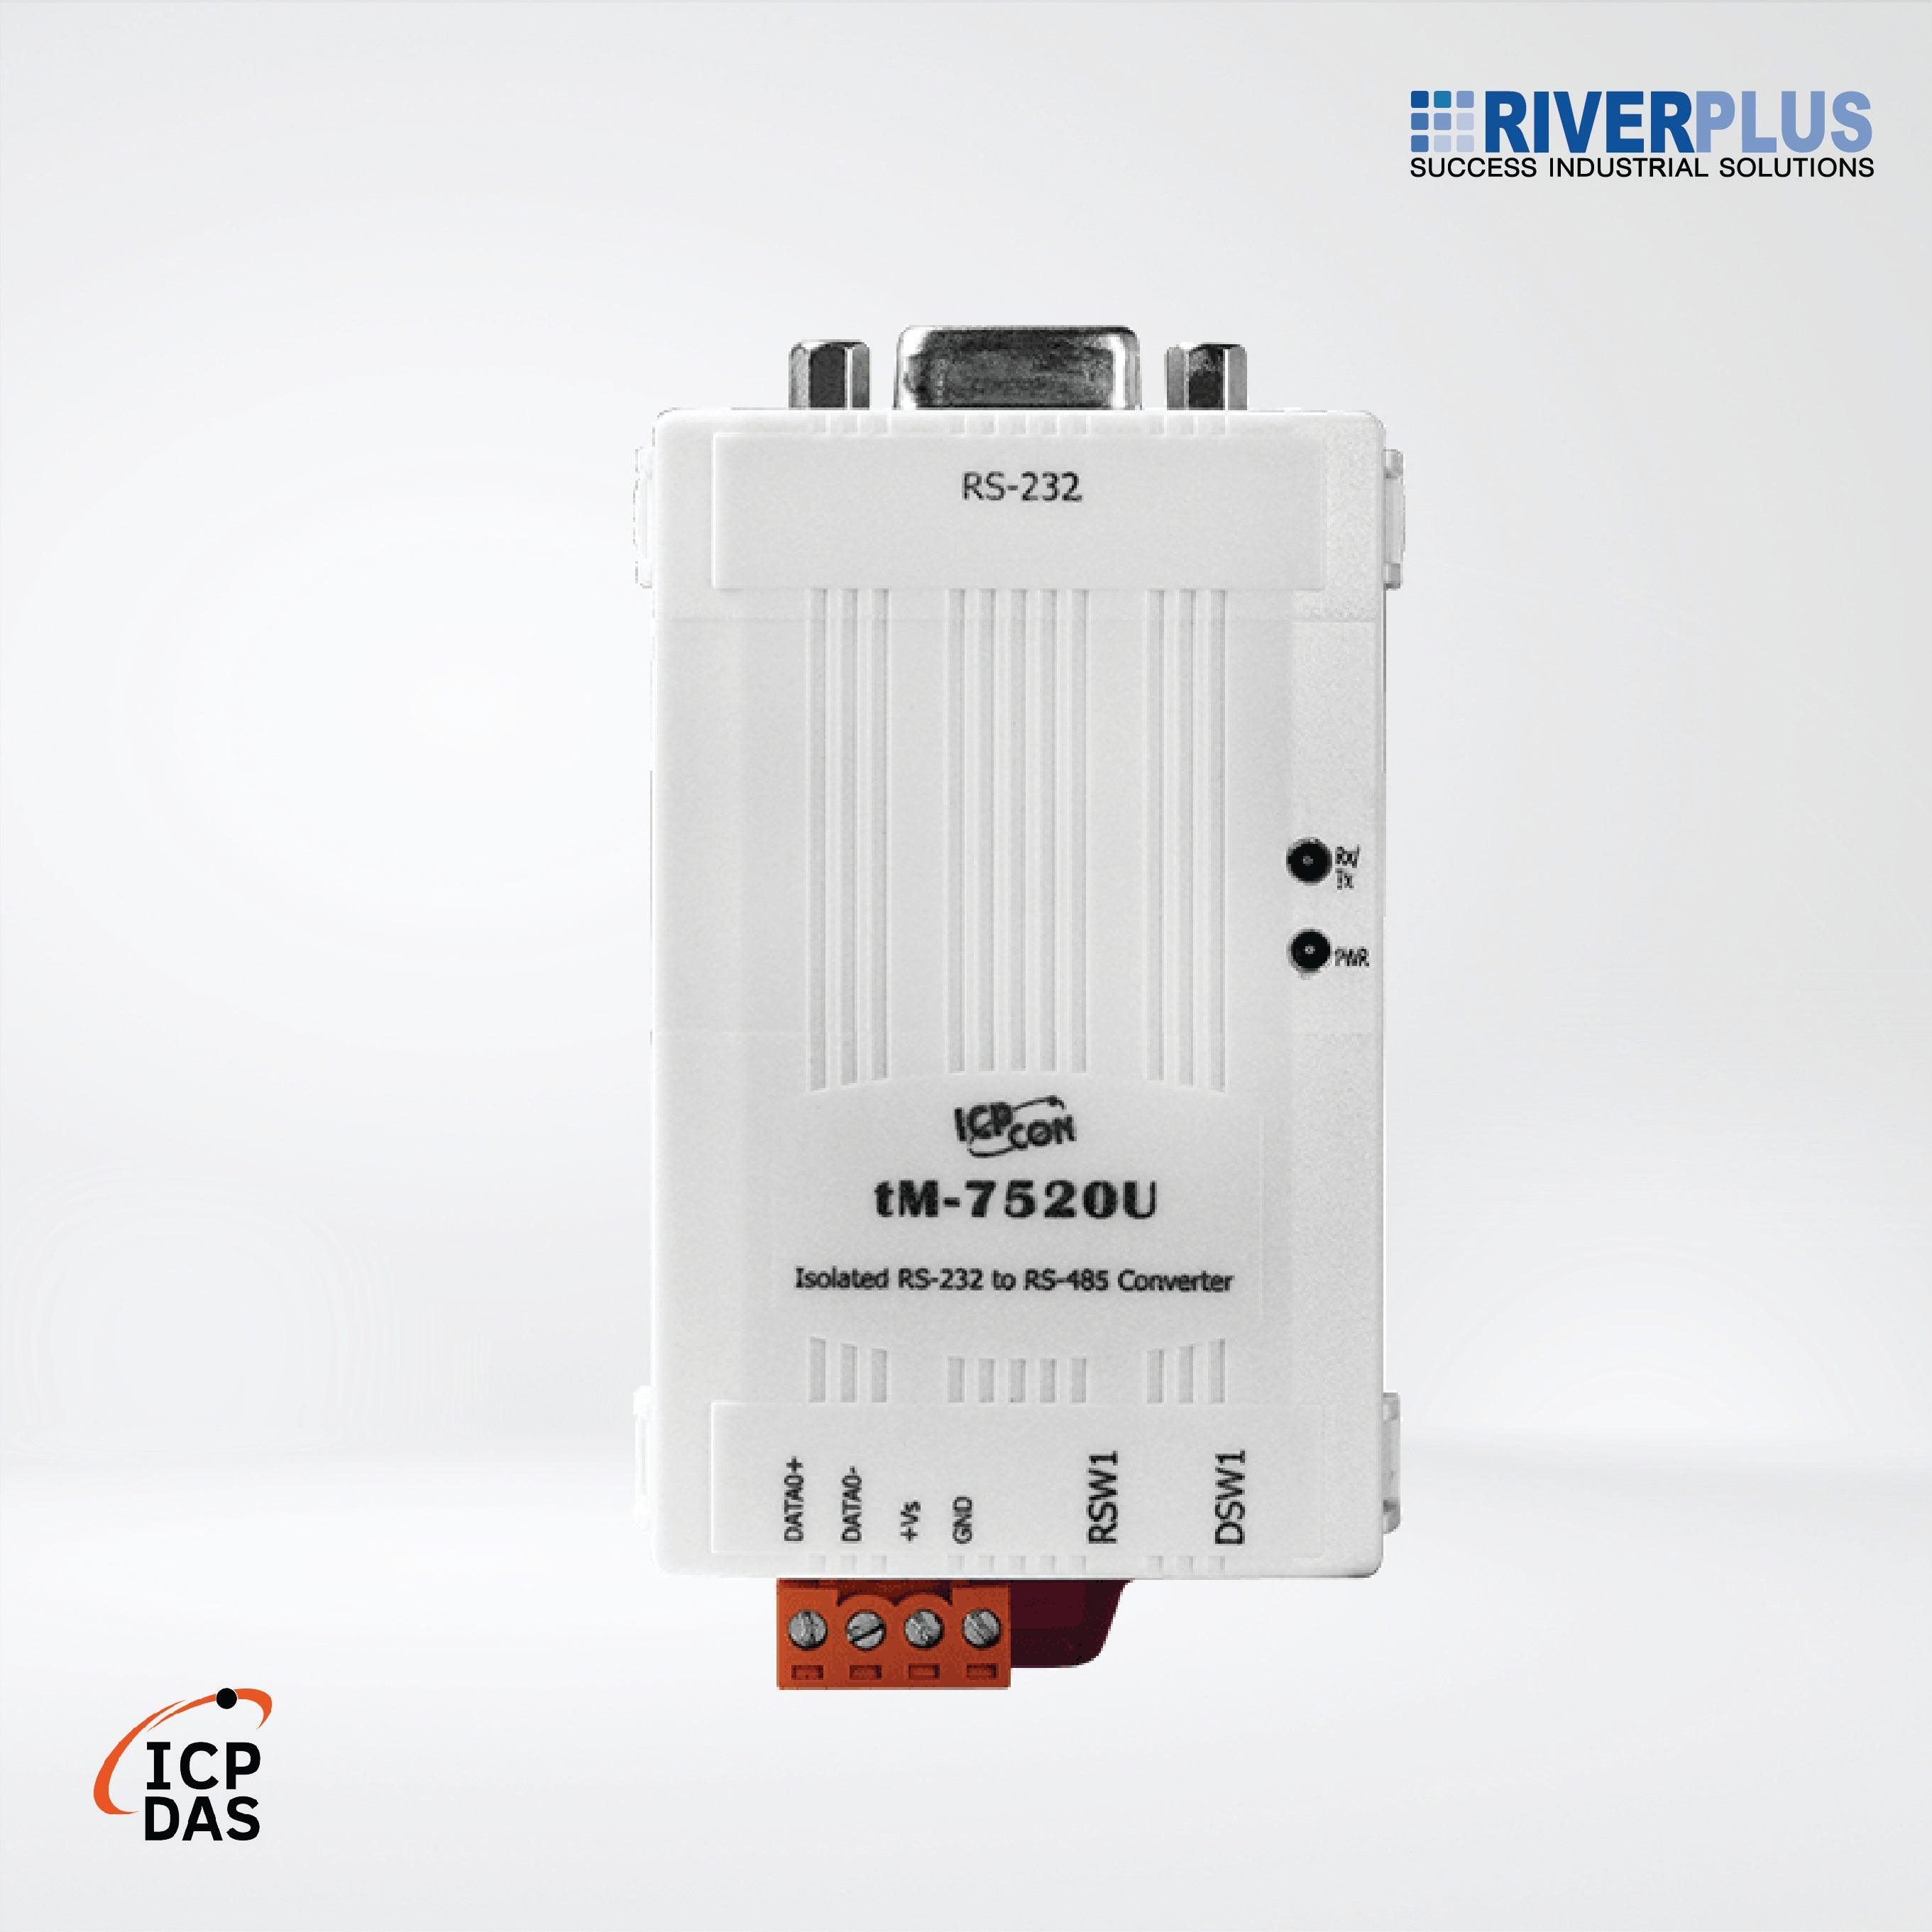 tM-7520U Tiny Isolated RS-232 to RS-485 Converter - Riverplus